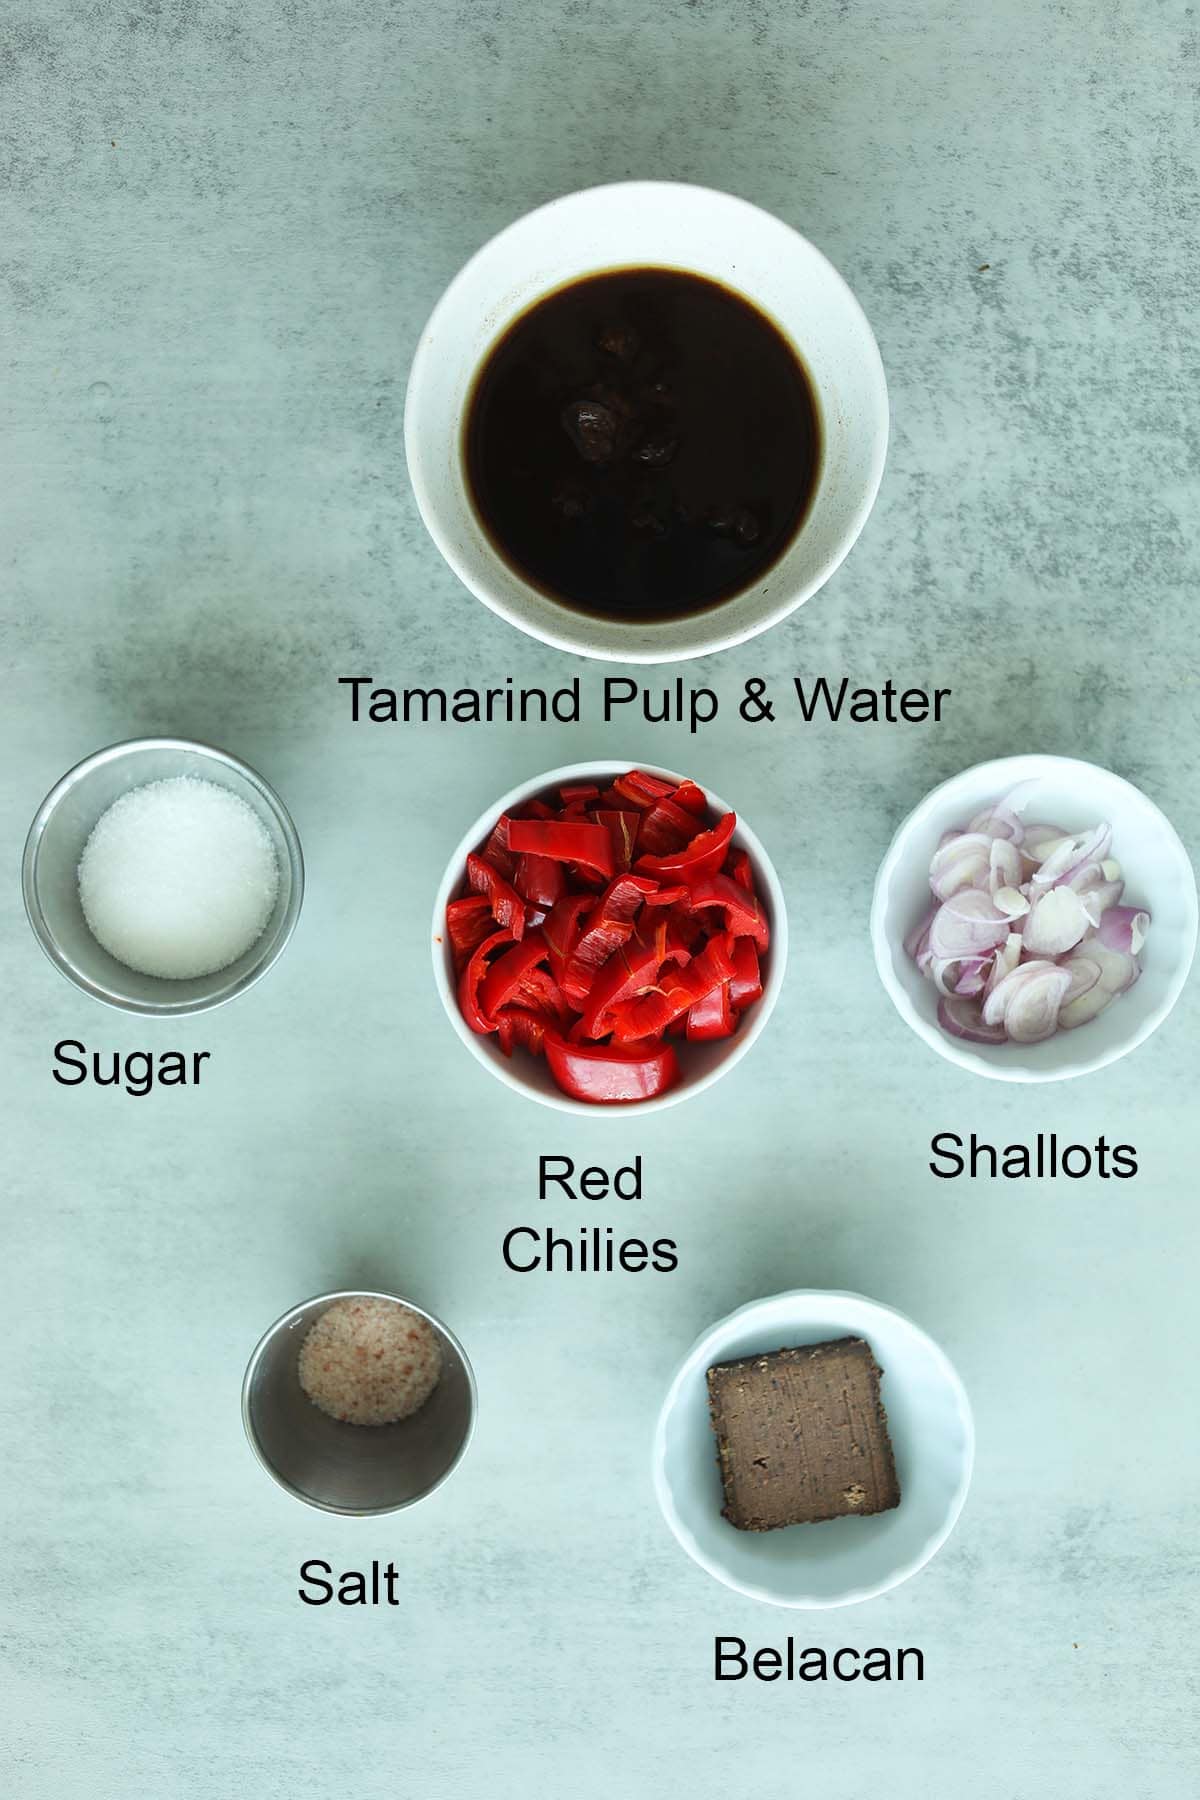 This image shows the Ingredients to make the Sambal Belacan.